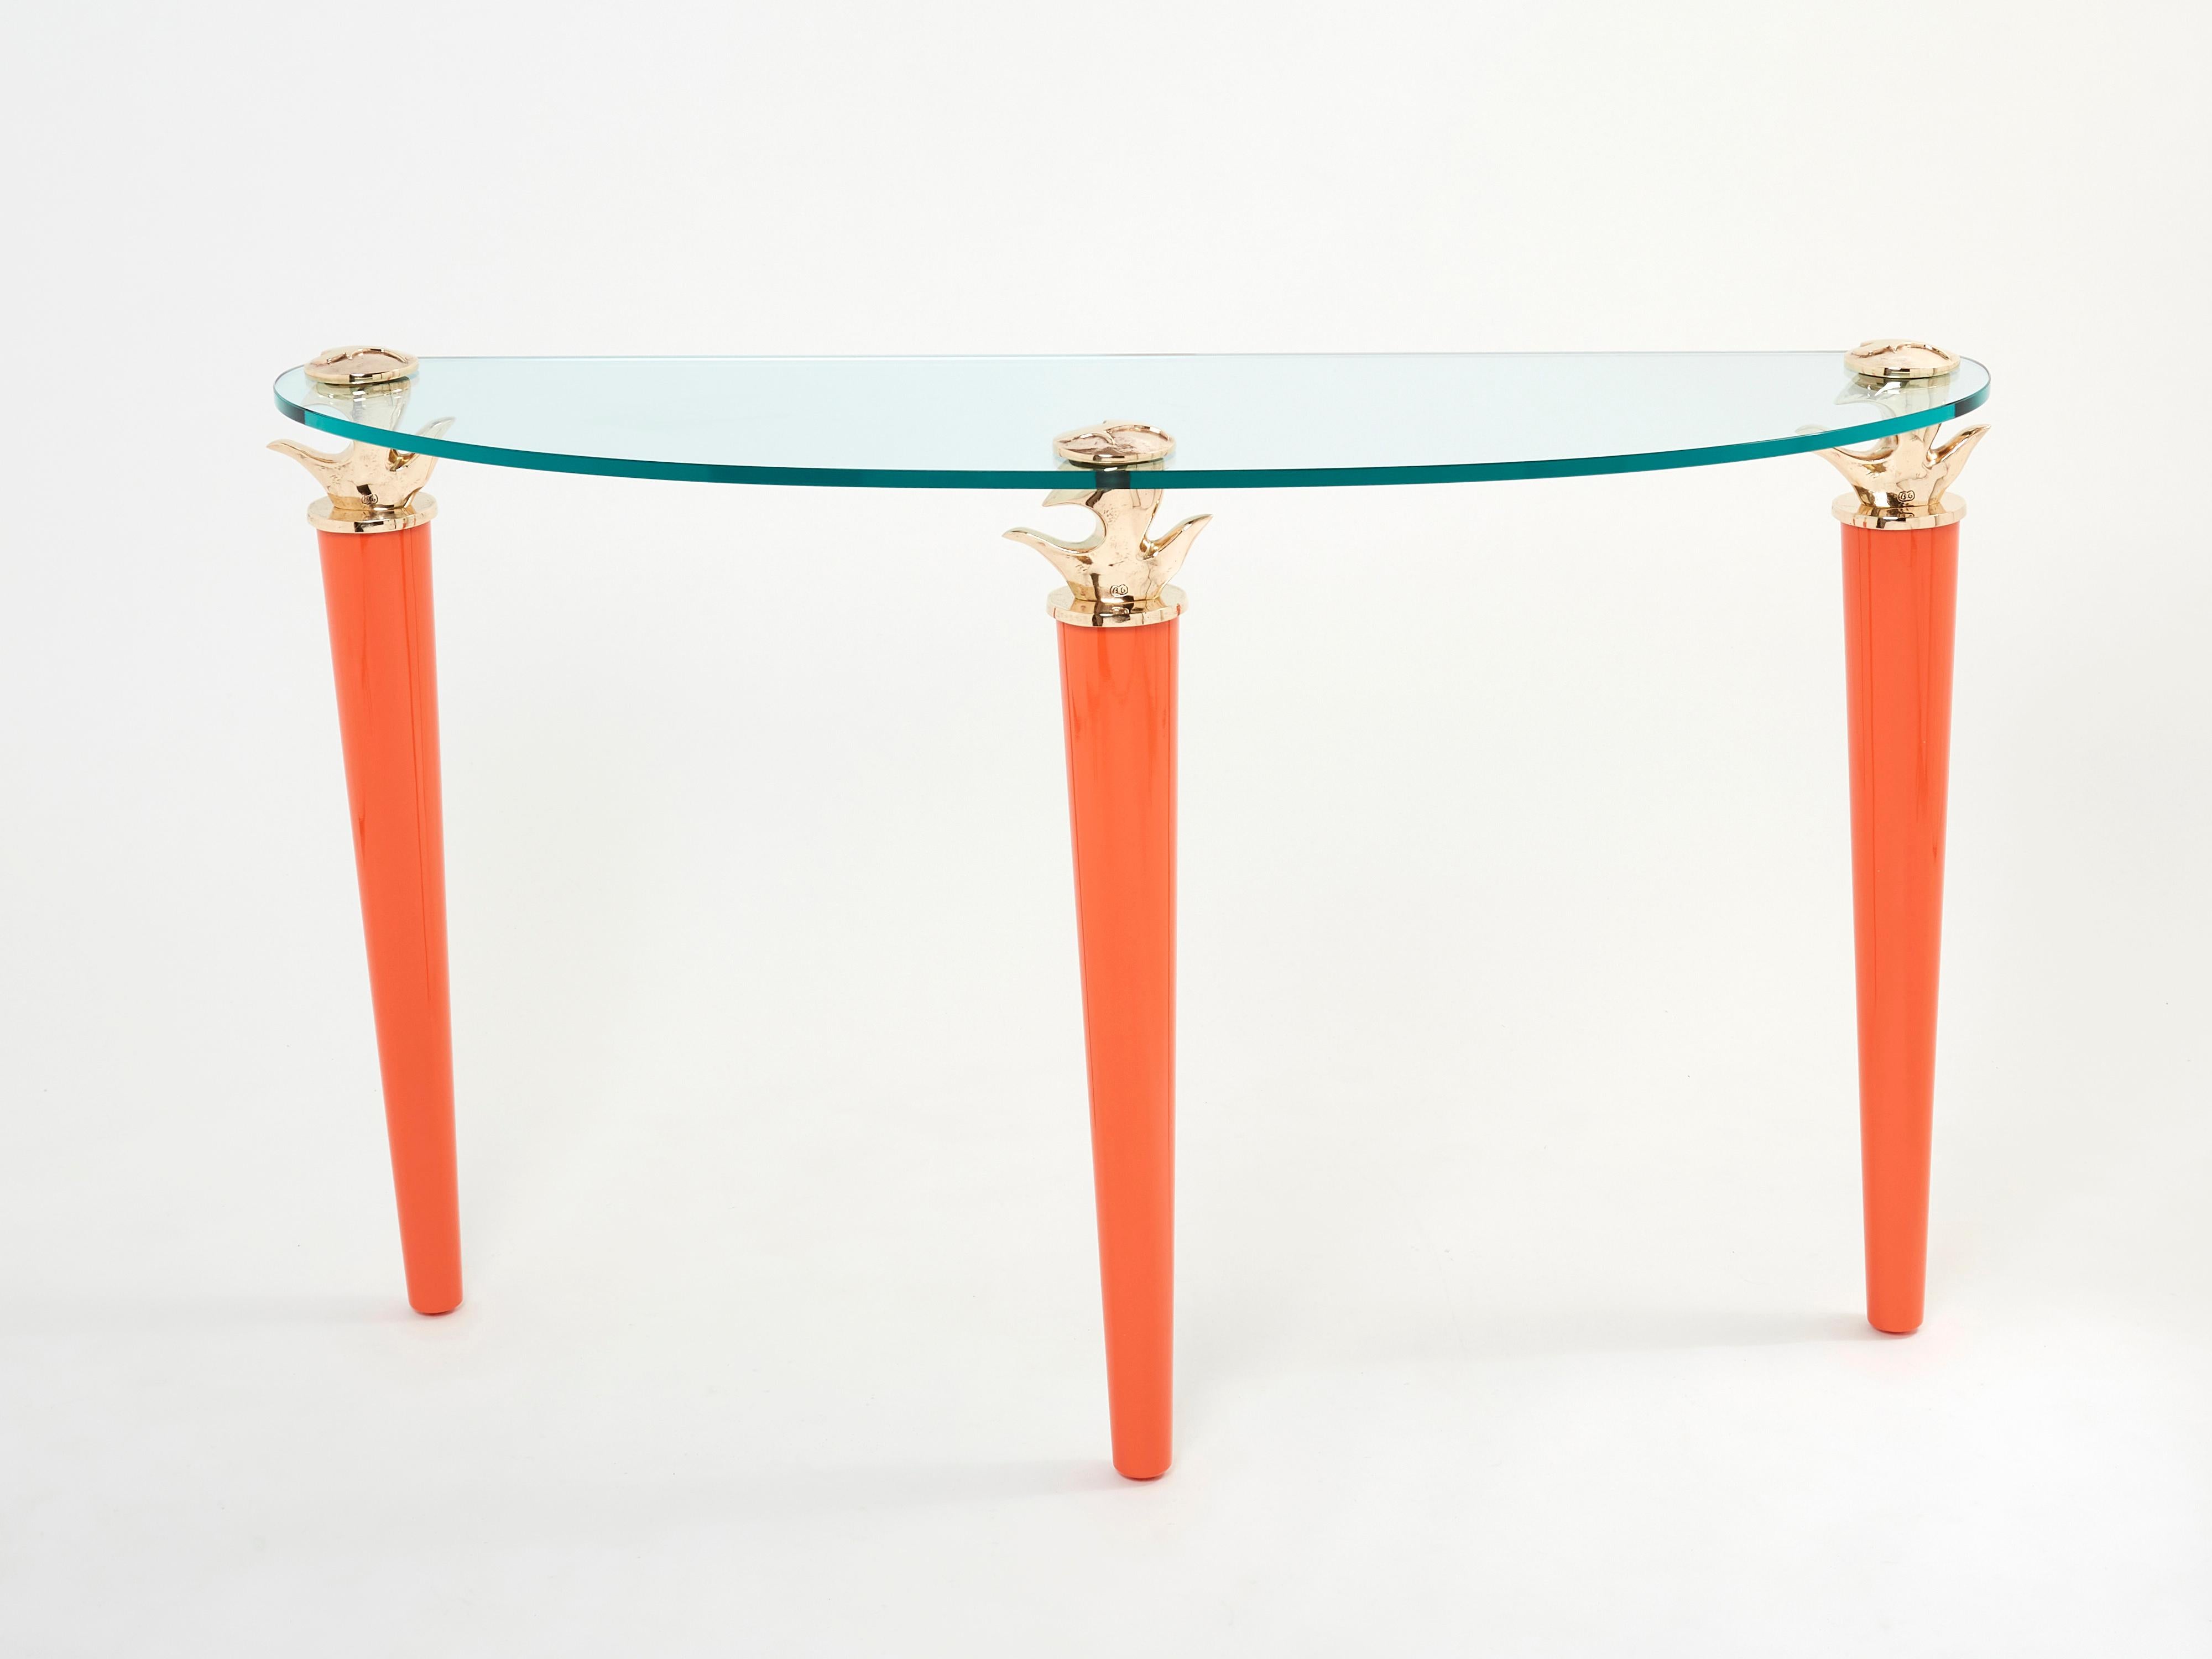 Rare signed console table by Elizabeth Garouste & Mattia Bonetti, model Concerto, designed and made in 1995 by the iconic duo. The three large feet are made in beautiful orange lacquered wood topped by gilt bronze elements, all stamped BG. This is